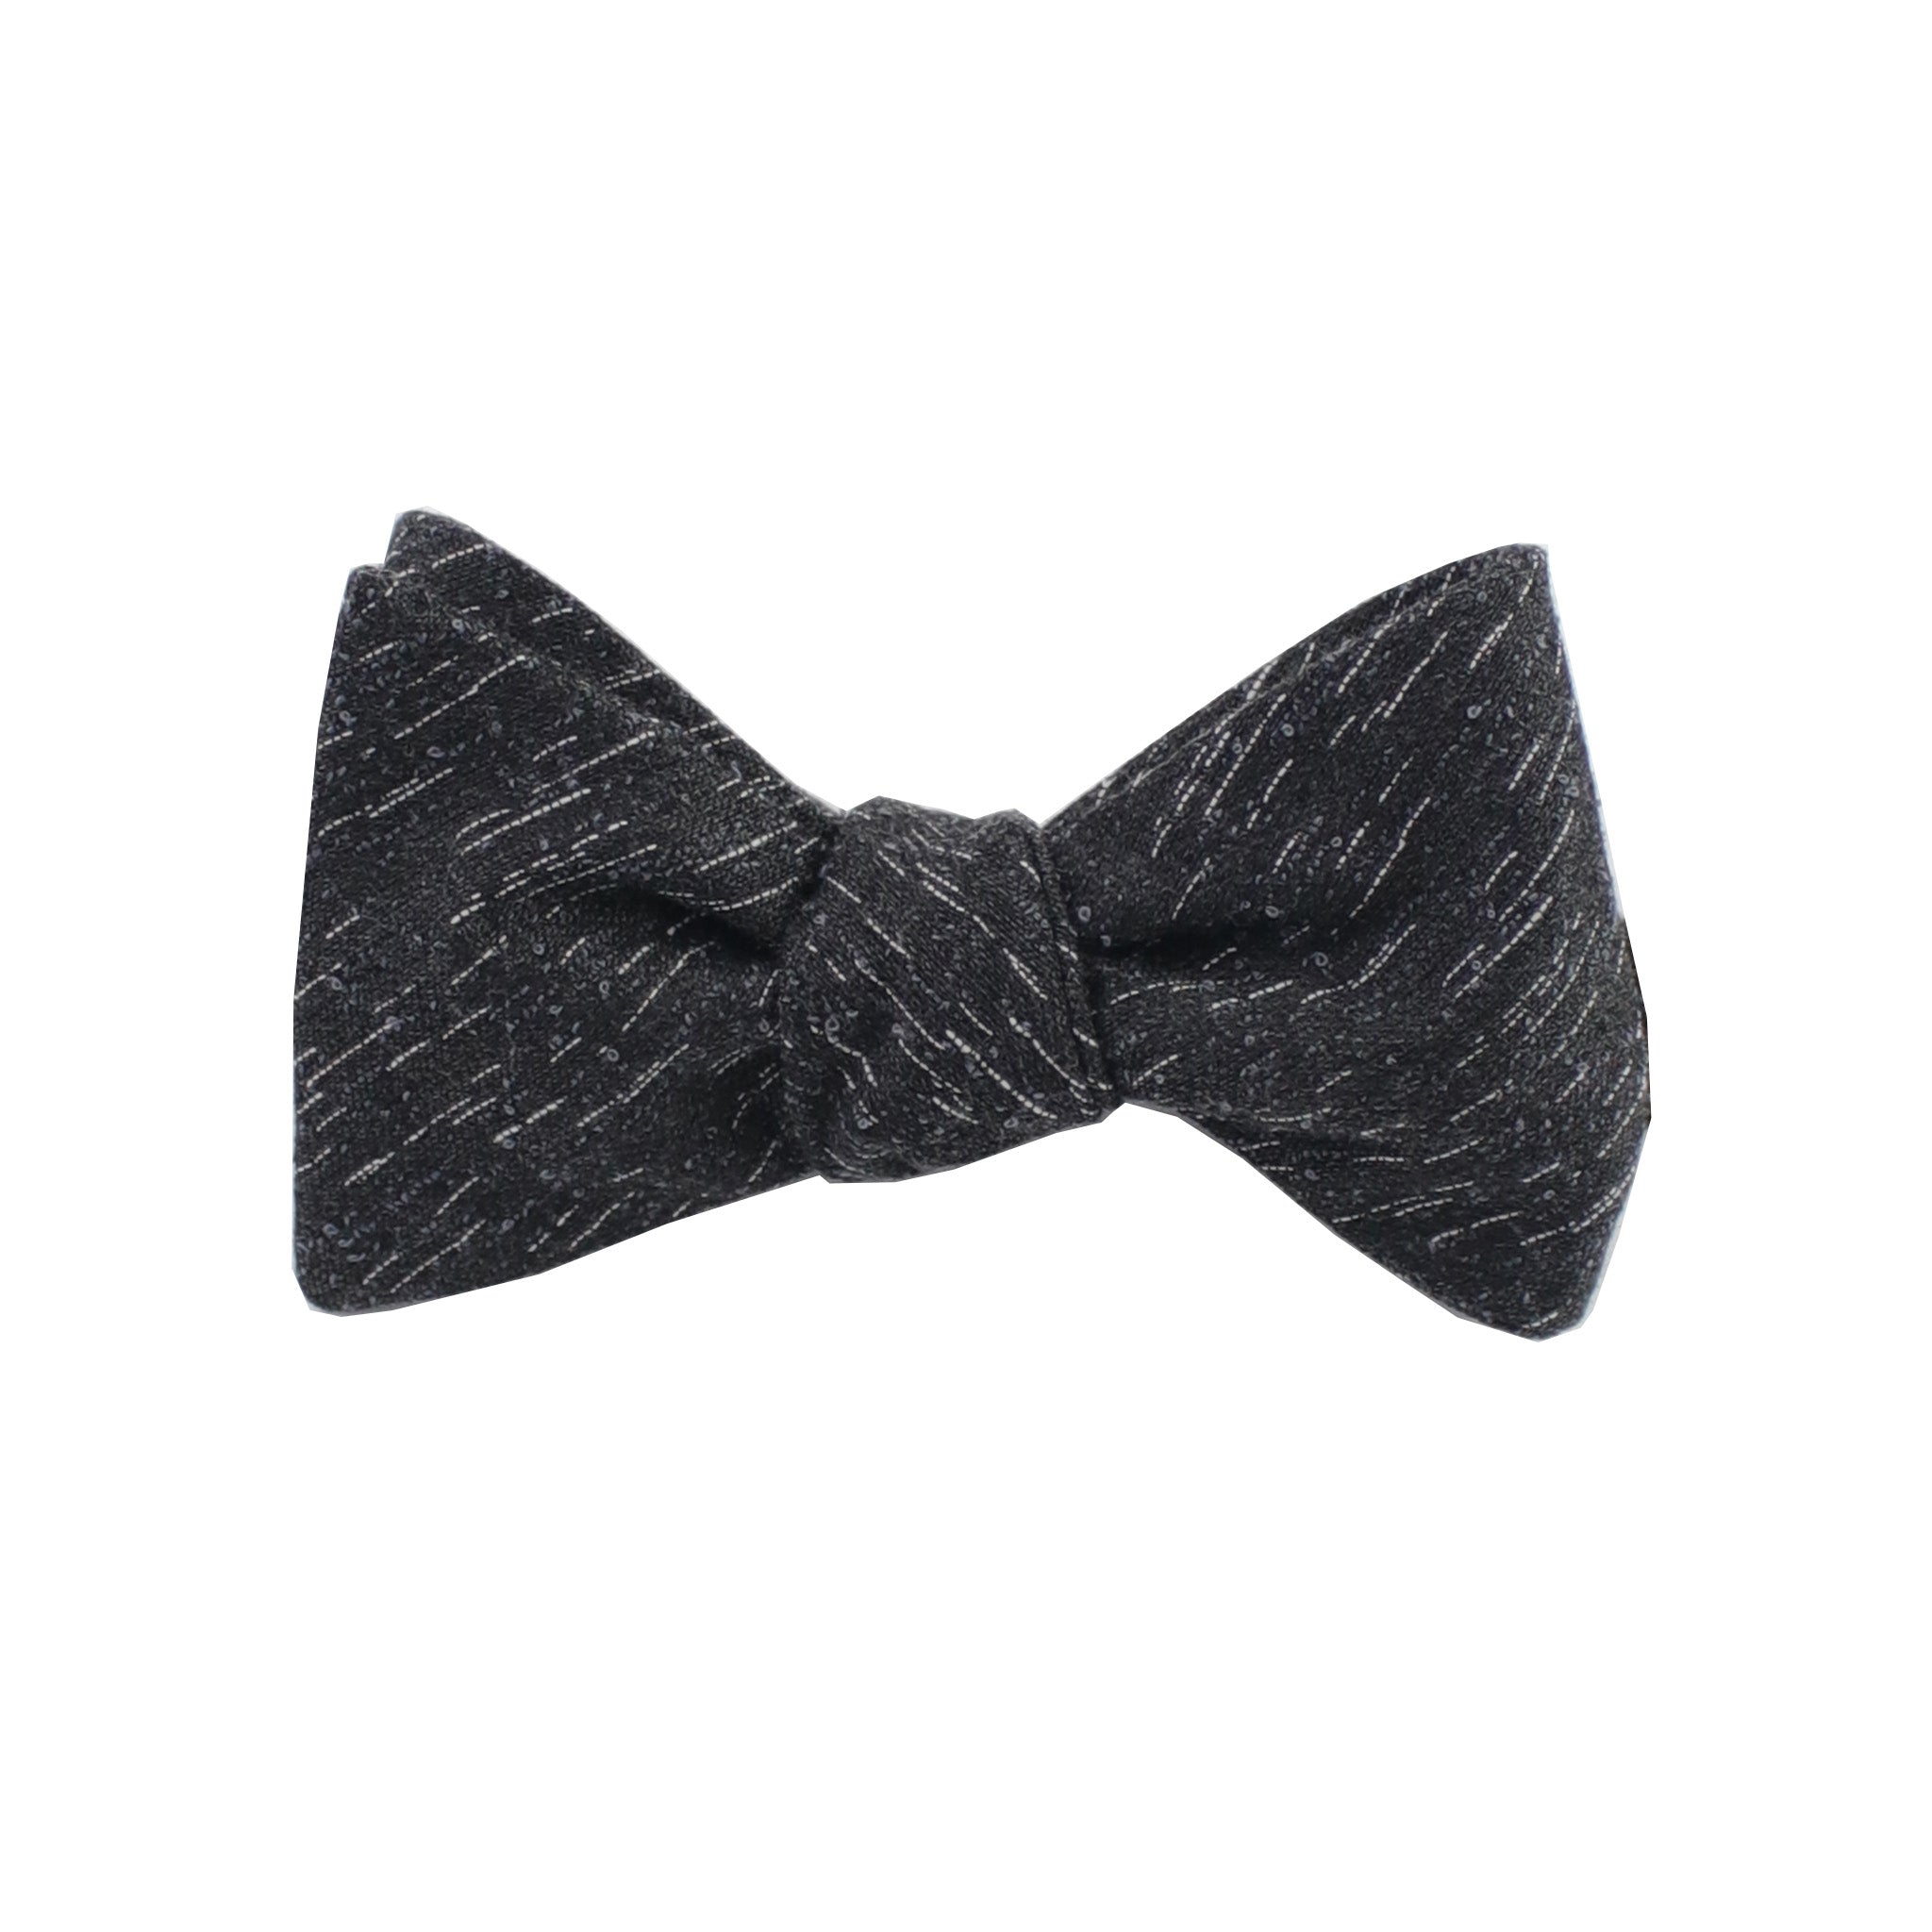 Charcoal Wool Textured Self Tie Bow Tie from DIBI